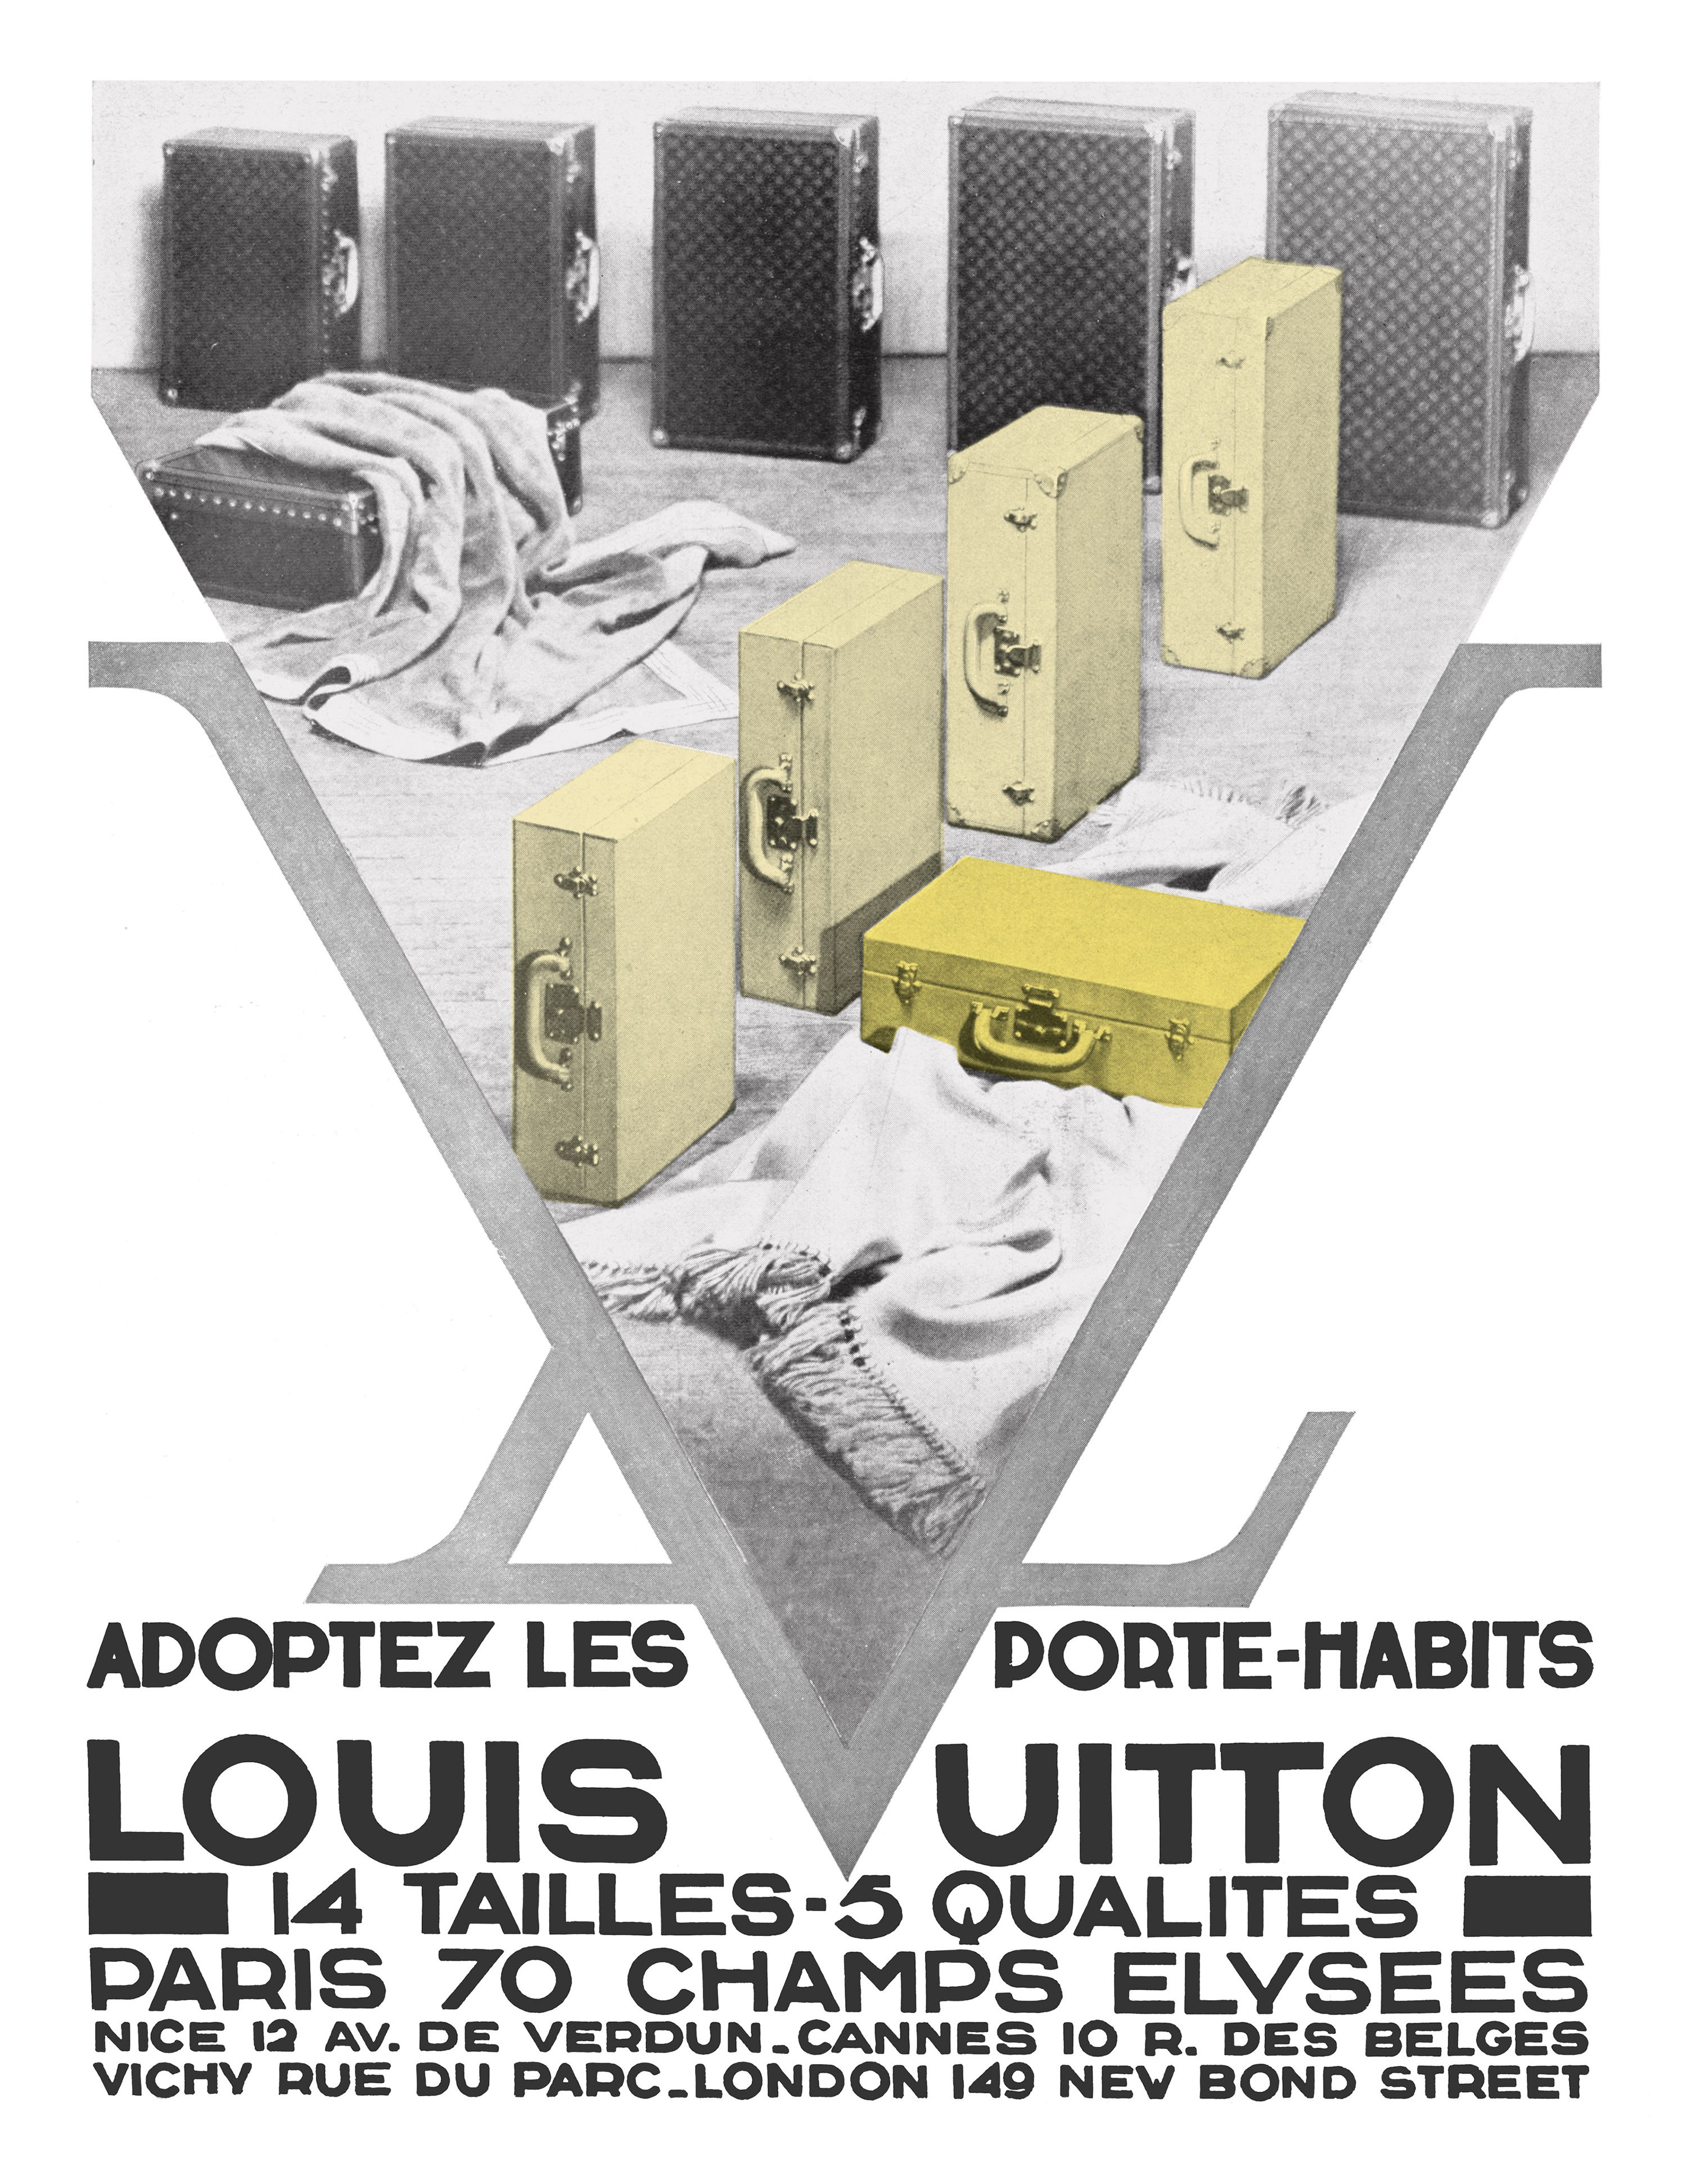 Louis Vuitton Posters decor. Vintage photos and posters. bags